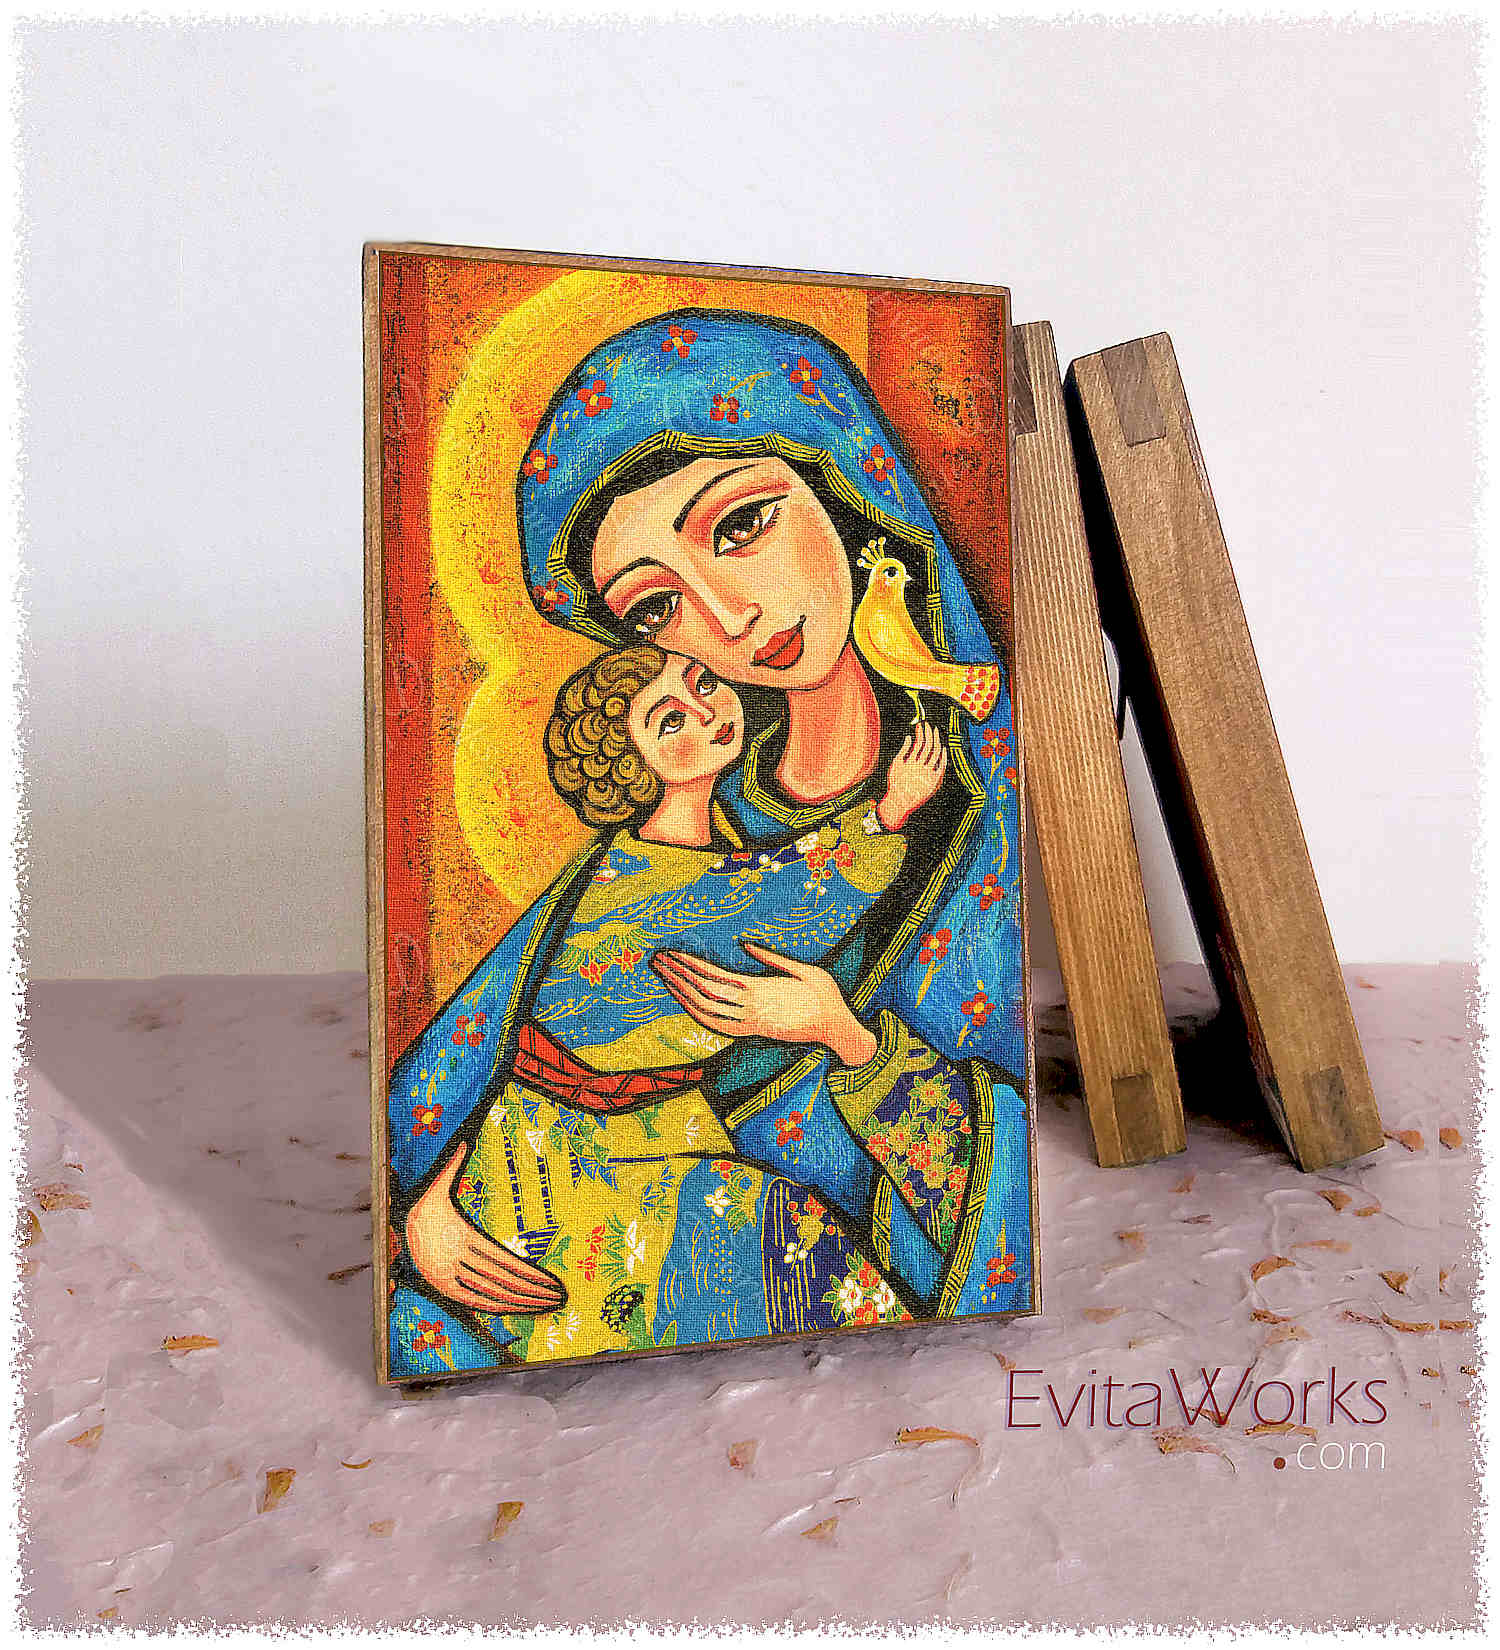 Hit to learn about "Mother Temple, Madonna and Child" on woodblocks